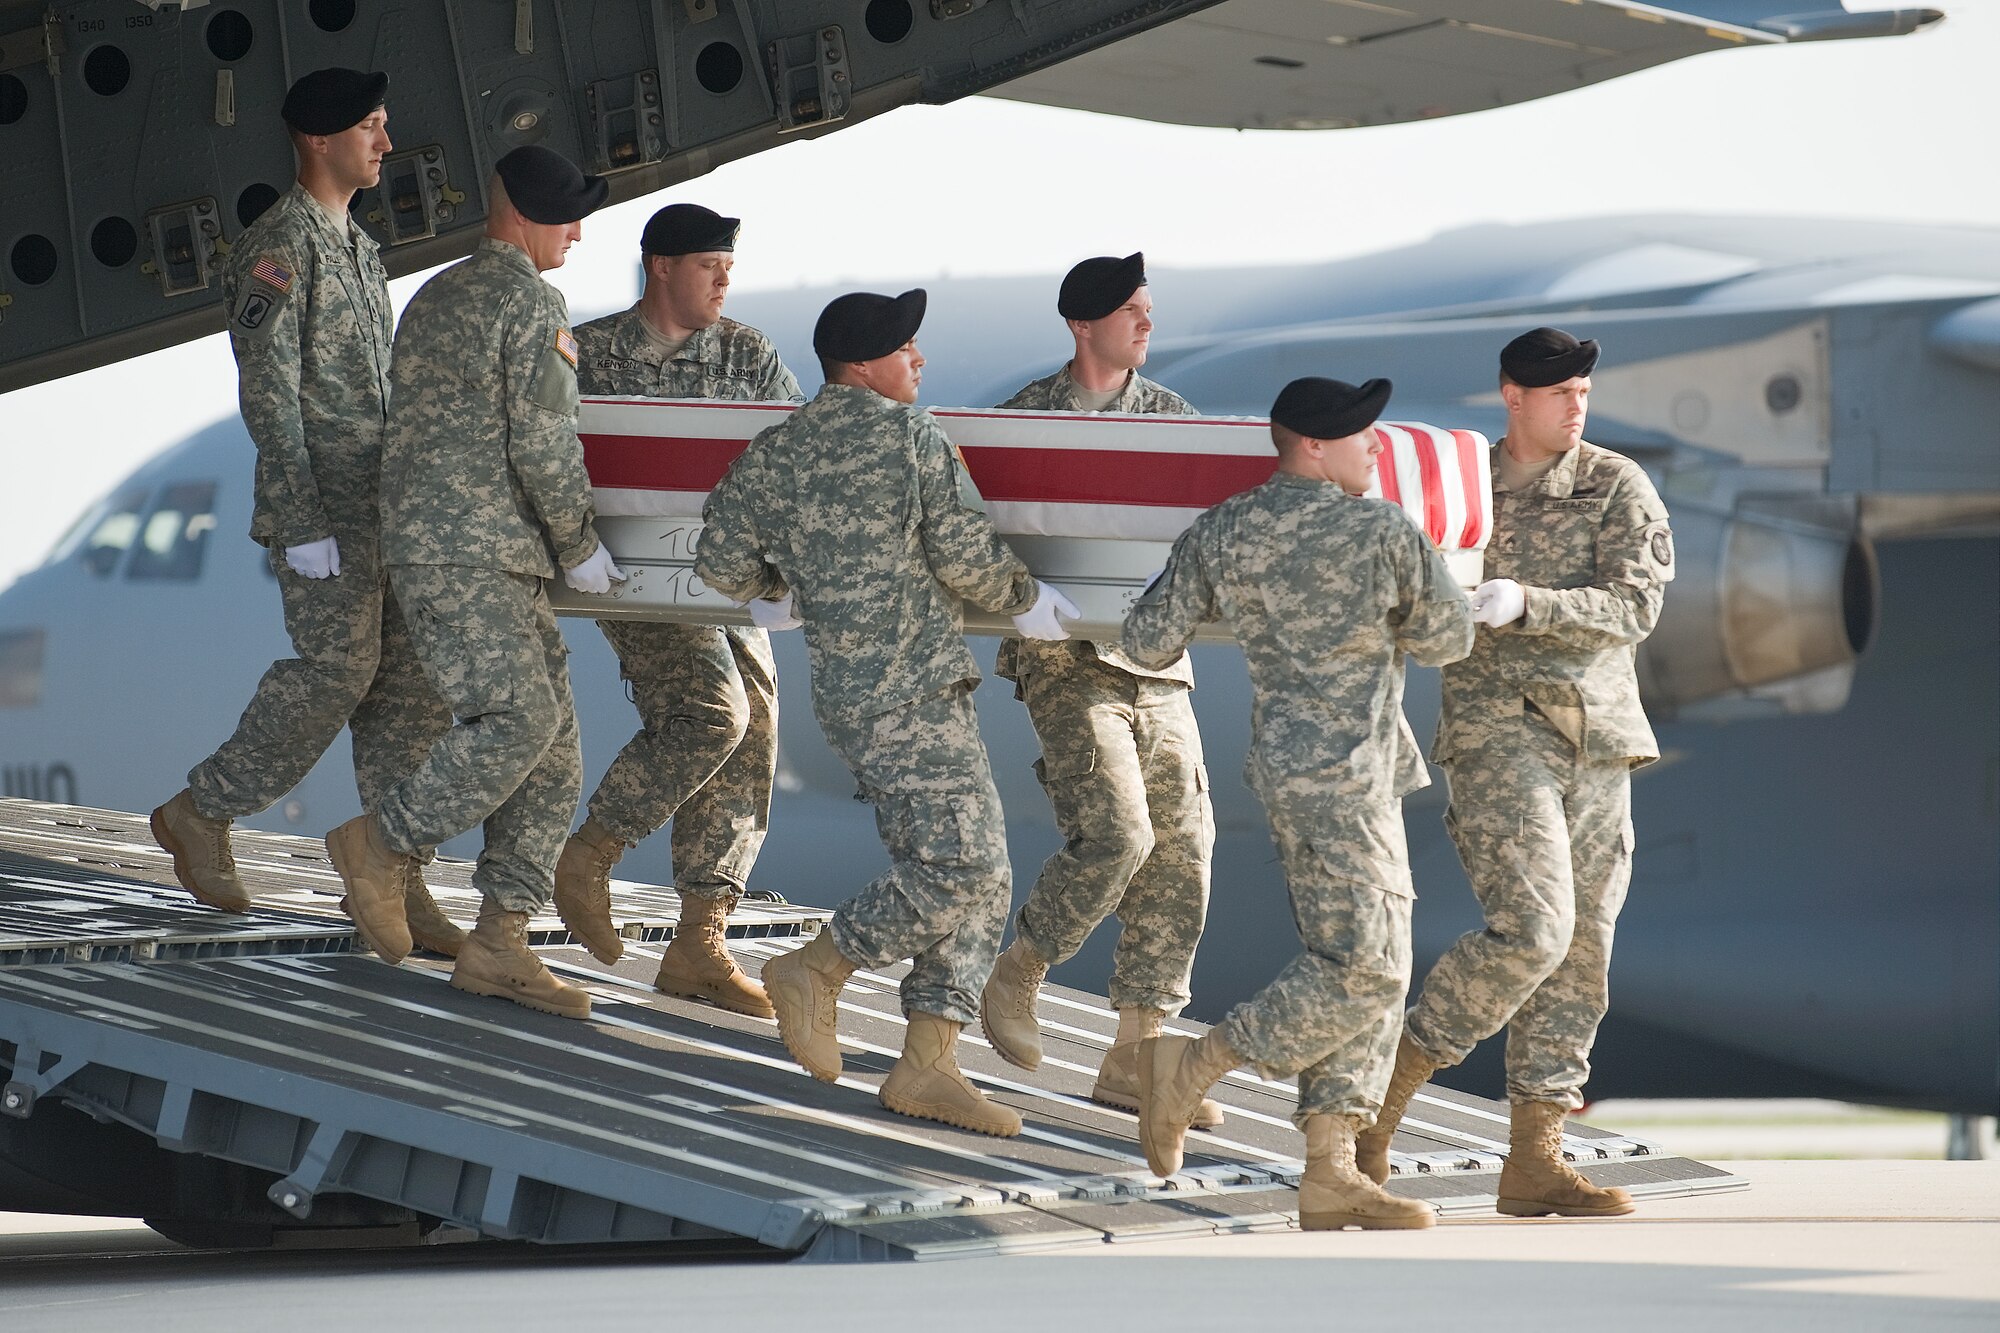 A U.S. Army carry team transfers the remains of Army Pfc. Benjamin J. Park, of Fairfax Station, Va., at Dover Air Force Base, Del., June 20. (U.S. Air Force photo/Roland Balik)